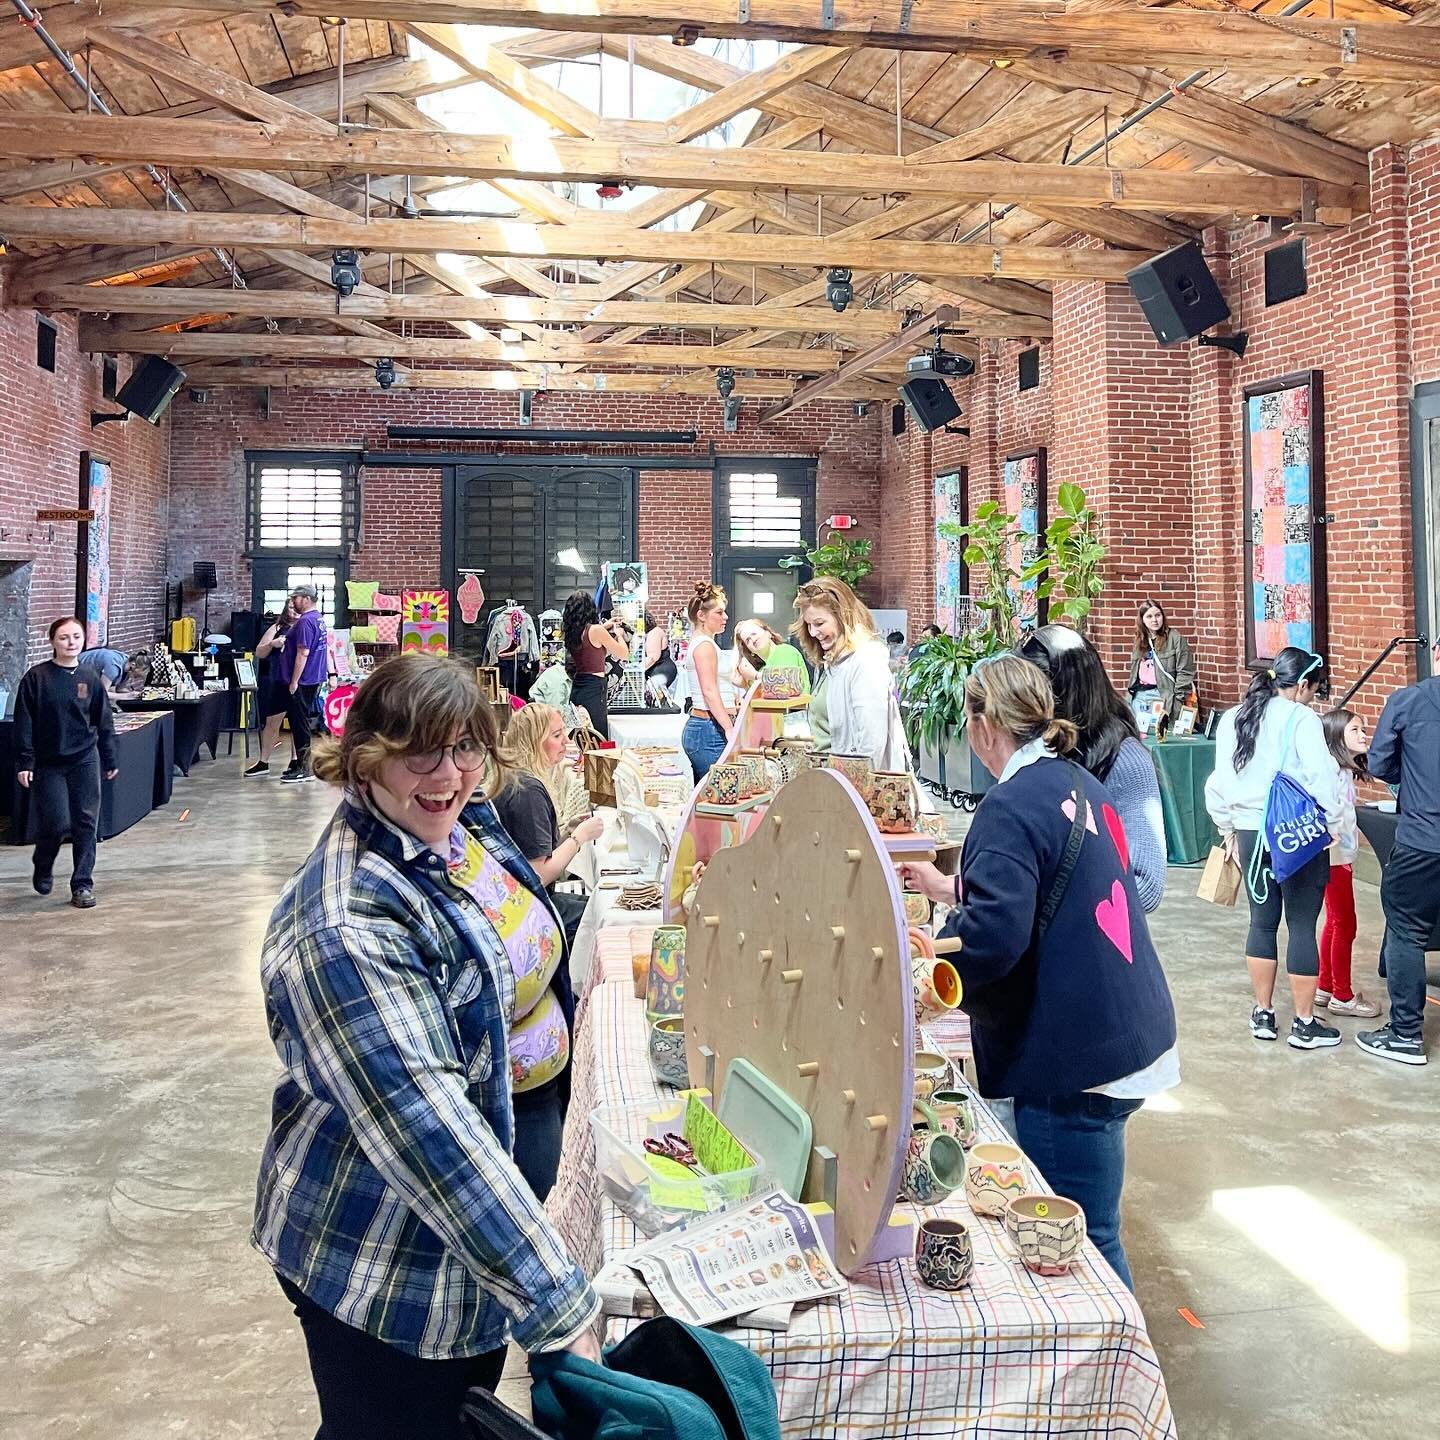 READY SET BLOOM 🌸 Market is TODAY Sunday 4/14 from 11am to 4pm @starboltphilly 1936 N Front Street 🛍️ INSIDE &amp; OUTSIDE on this BEAUTIFUL SPRING DAY 🐝 Come shop over 45 local vendors, grab &amp; drink, some food &amp; maybe play some pool?! 🍹?